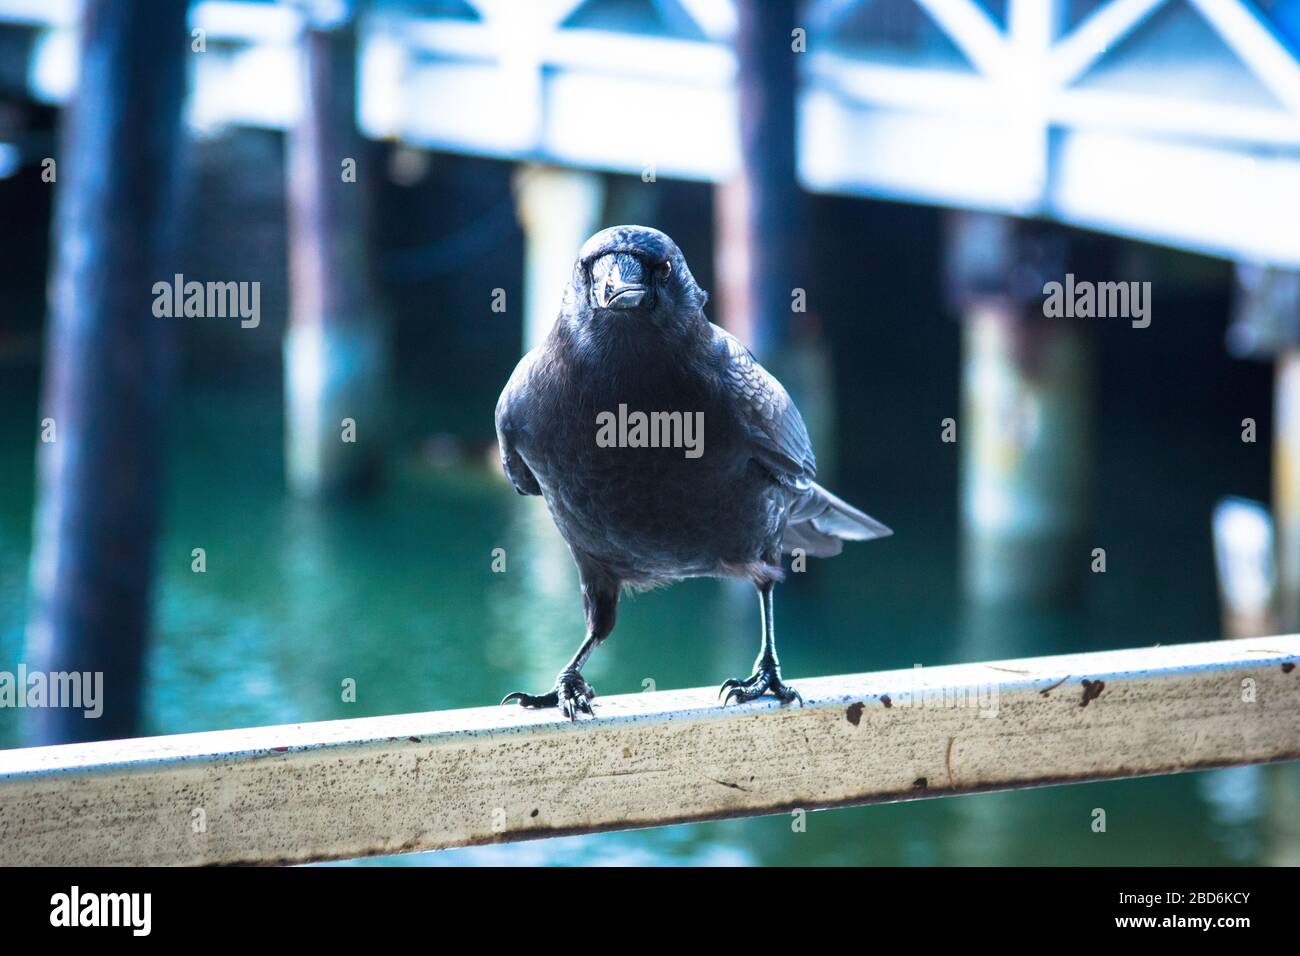 A black crow/raven staring while standing on a pier Stock Photo